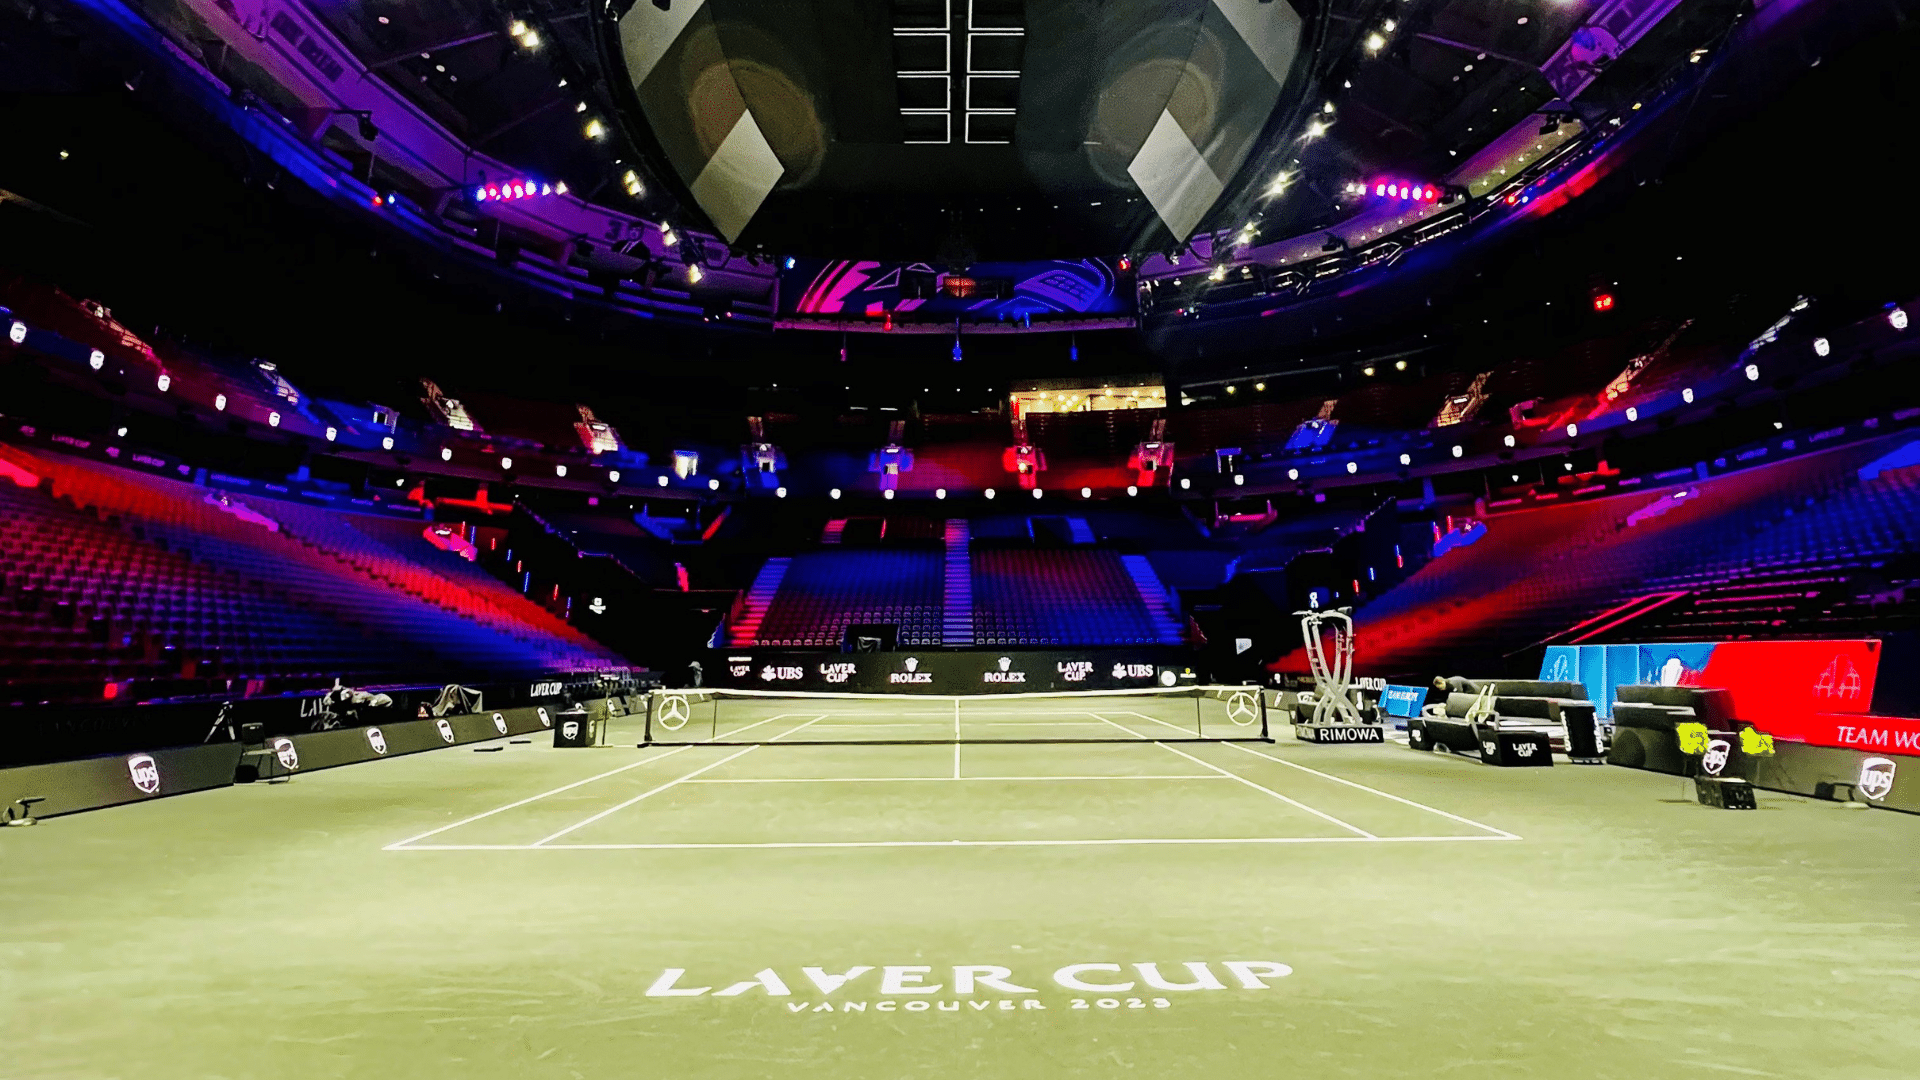 Gravity Media successfully captured the Laver Cup tennis tournament for the sixth consecutive year partnering with Tennis Australia